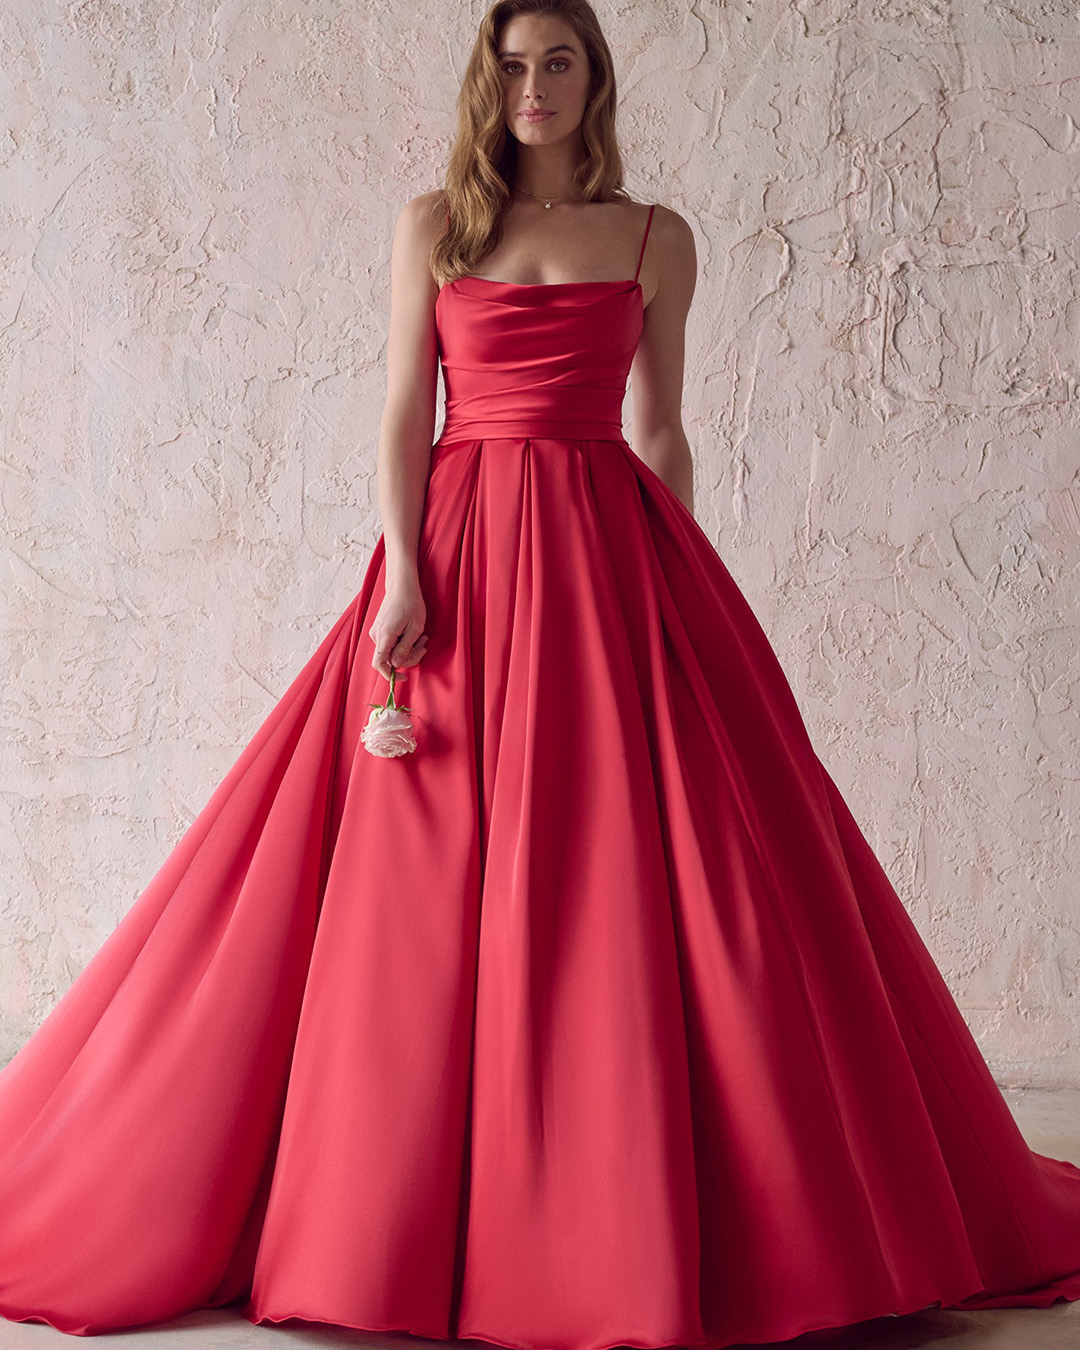 colourful wedding dresses ball gown red simple with spaghetti straps maggie sottero